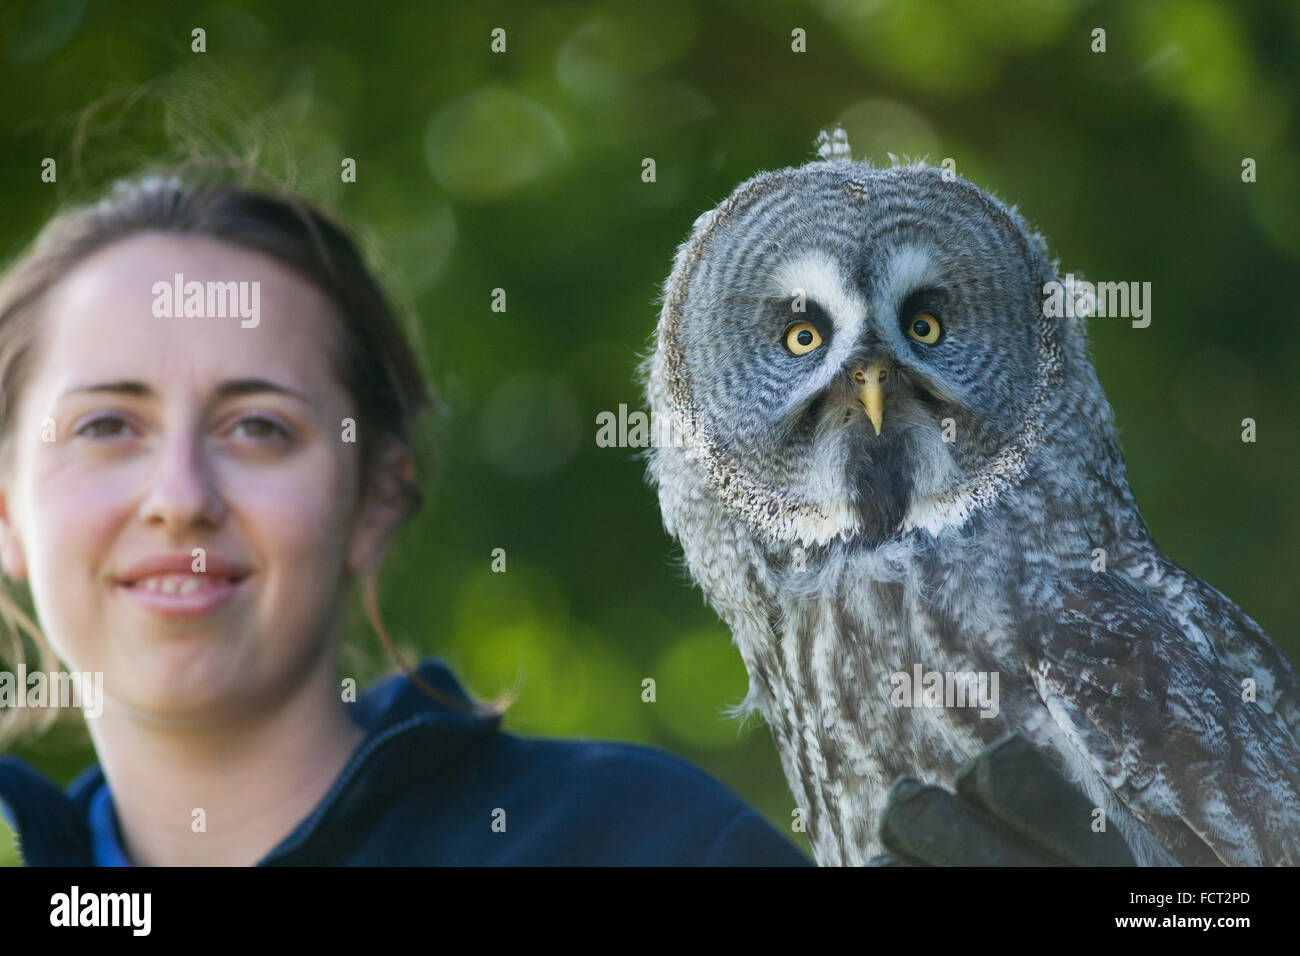 Great Grey Owl (Strix nebulosa) and Trainer (Homo sapiens). Both human and owl have forward facing eyes allow binocular vision. Stock Photo